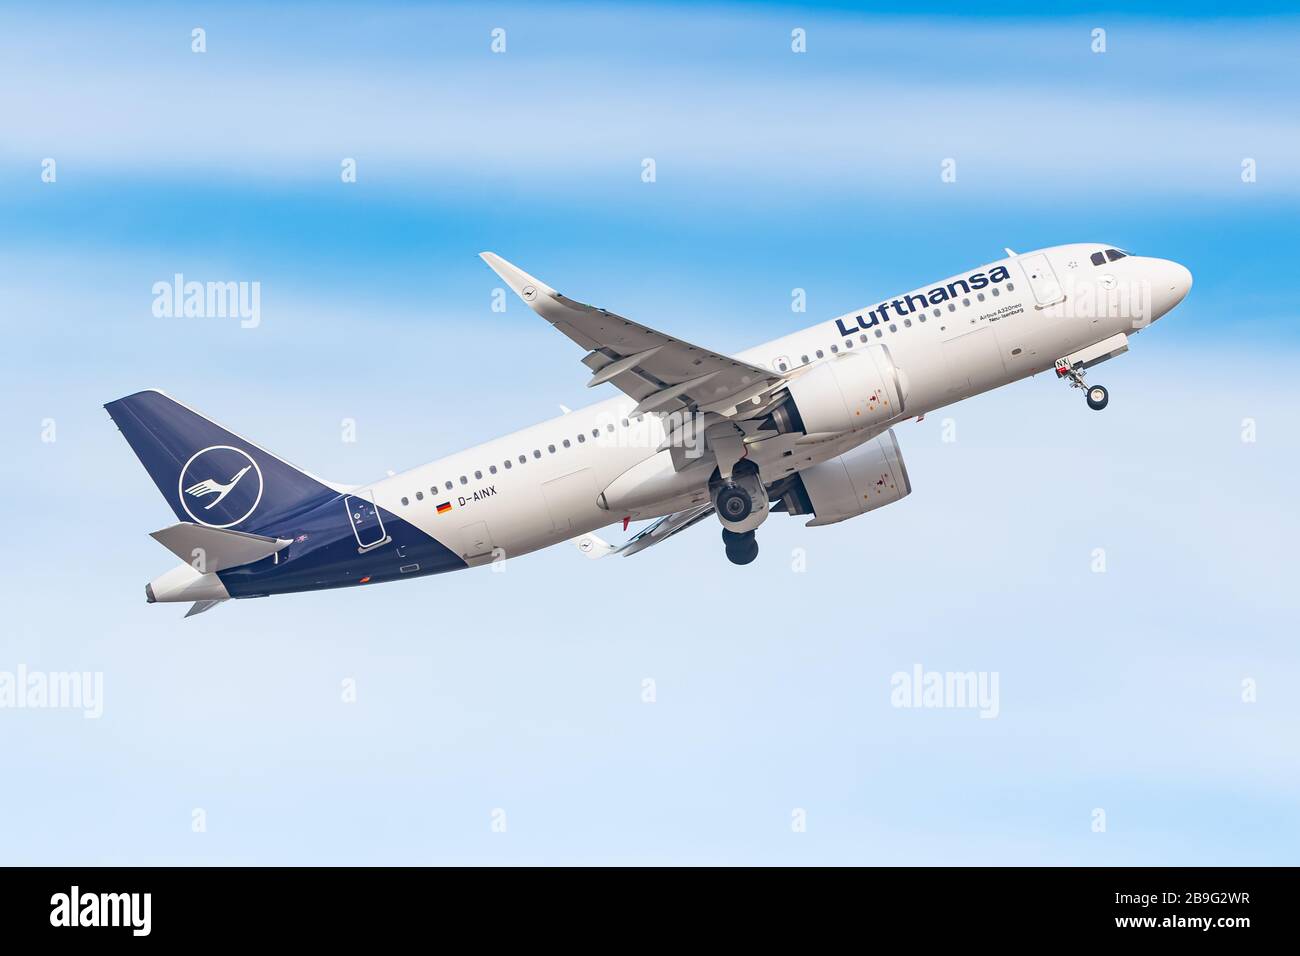 Munich, Germany - February 15, 2020: Lufthansa Airbus A320 Neo airplane at Munich airport (MUC) in Germany. Airbus is an aircraft manufacturer from To Stock Photo